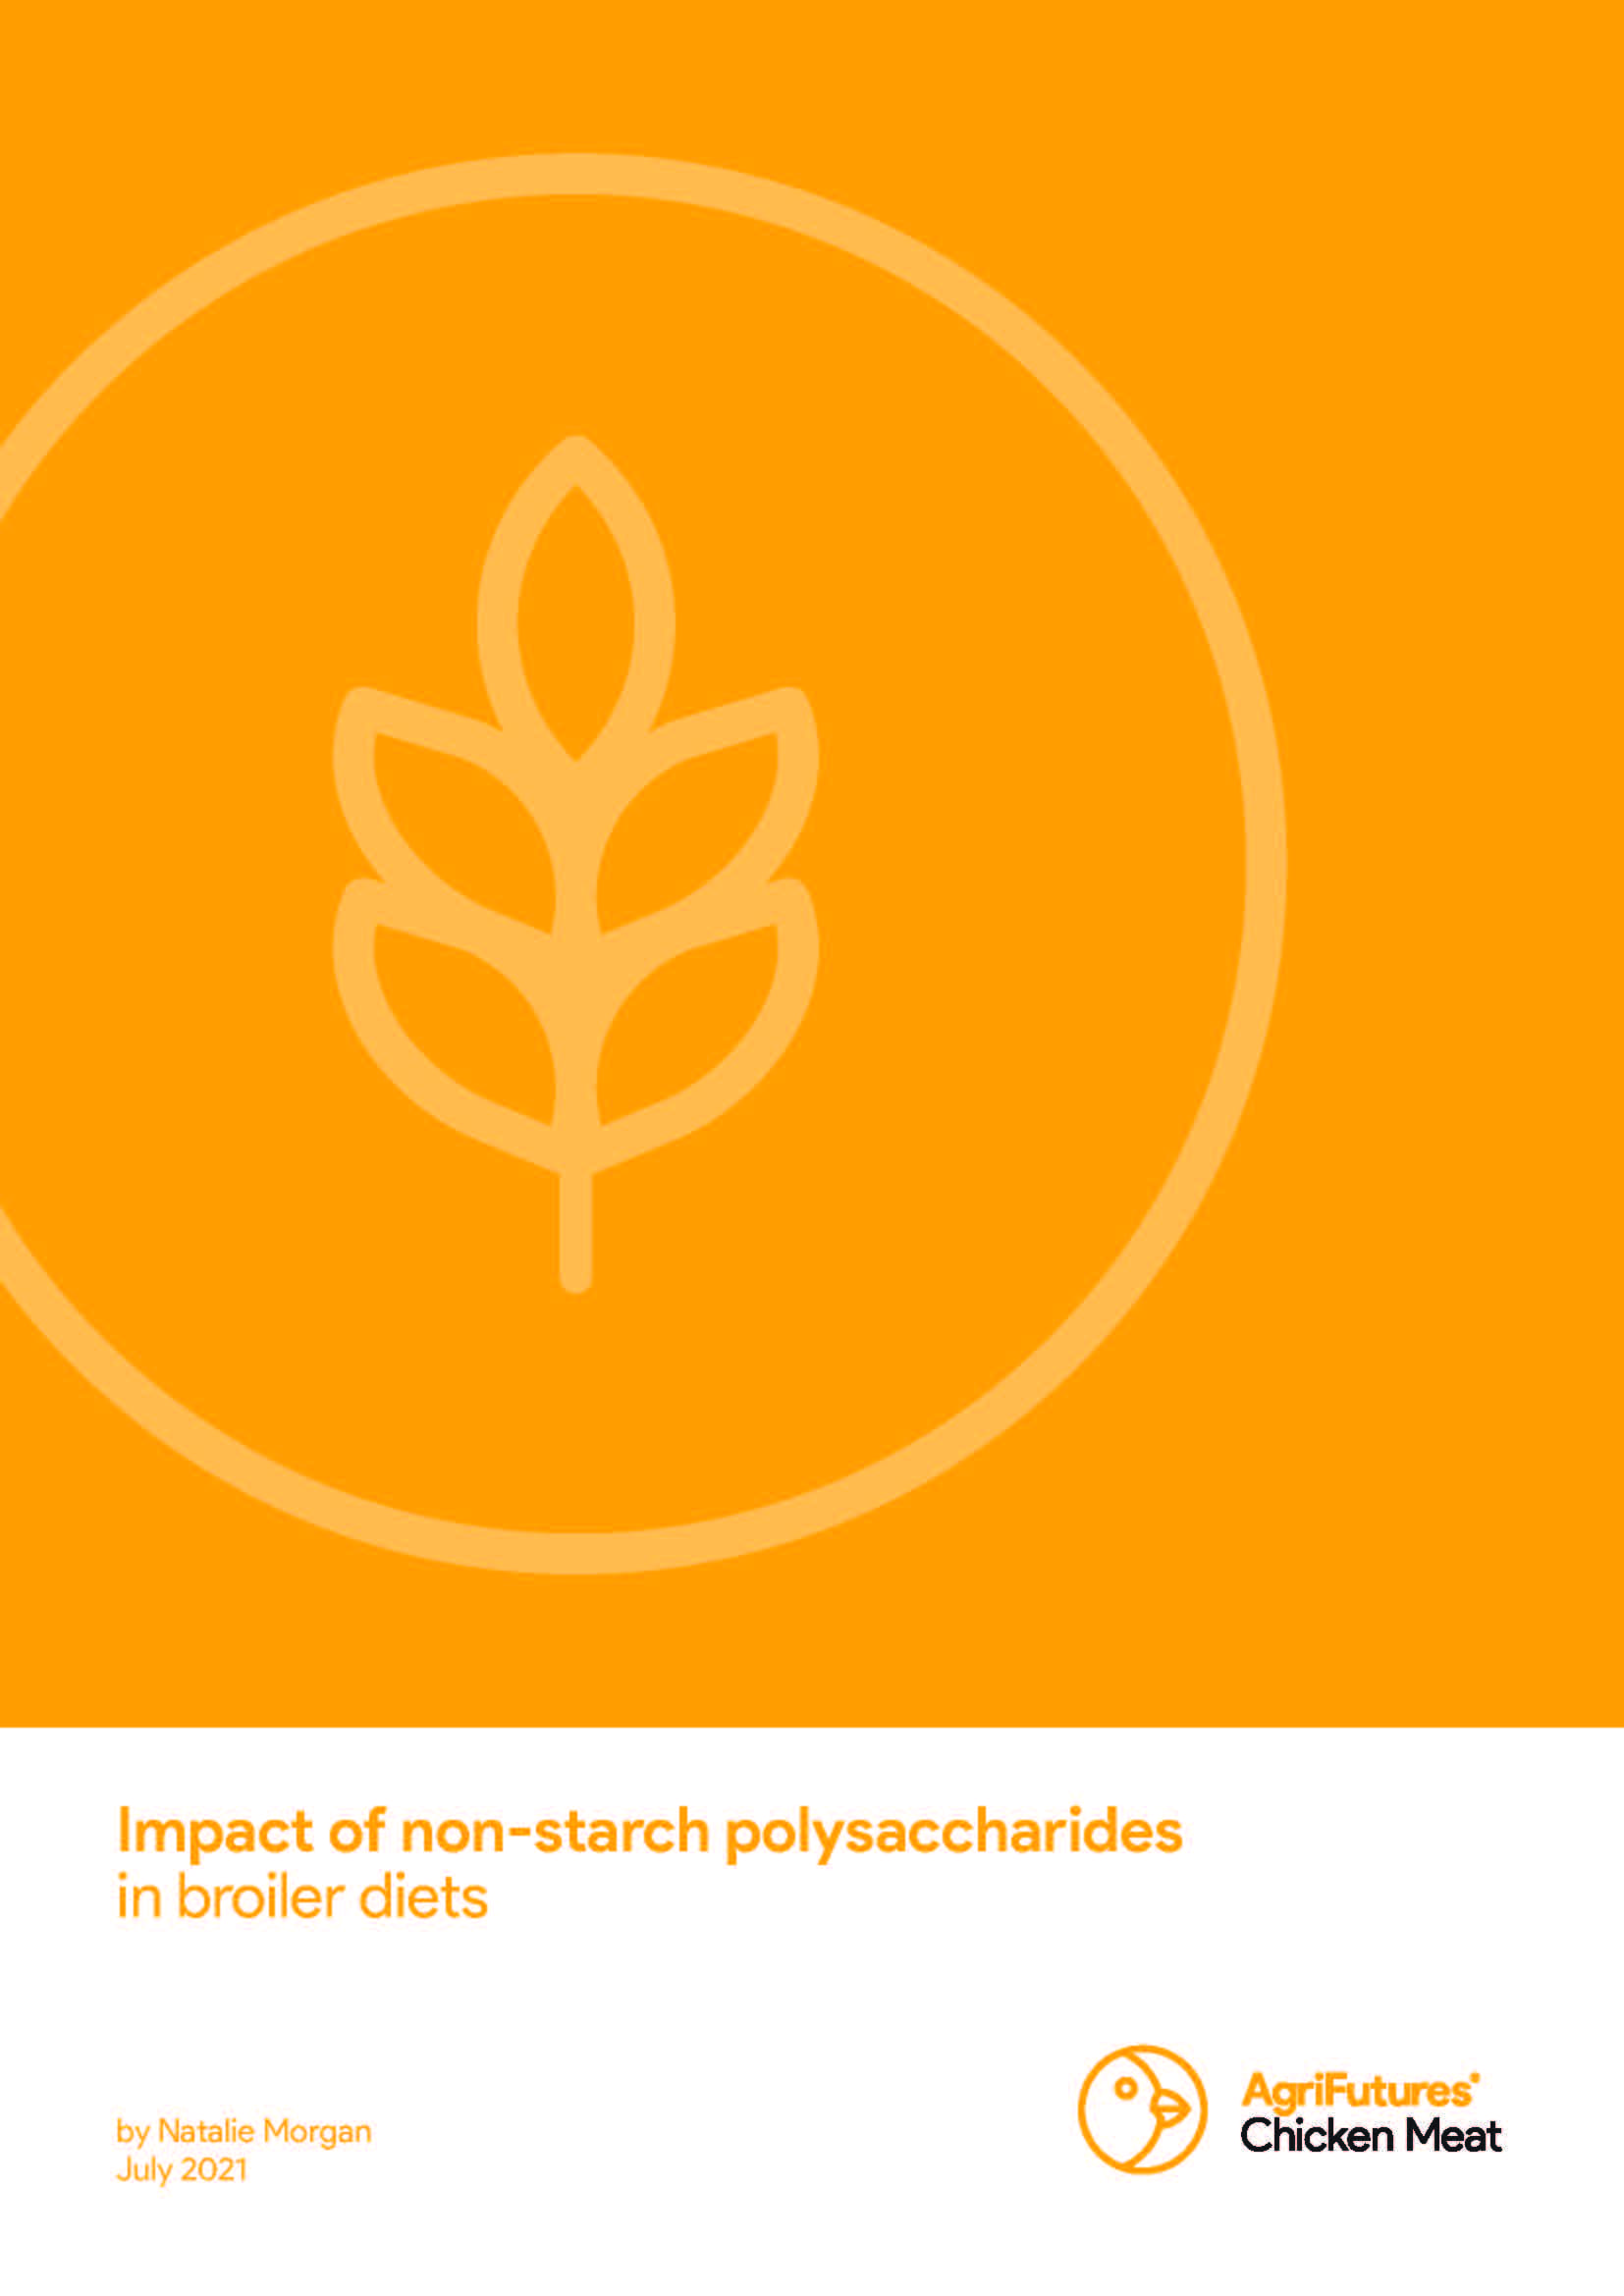 Impact of non-starch polysaccharides in broiler diets - image